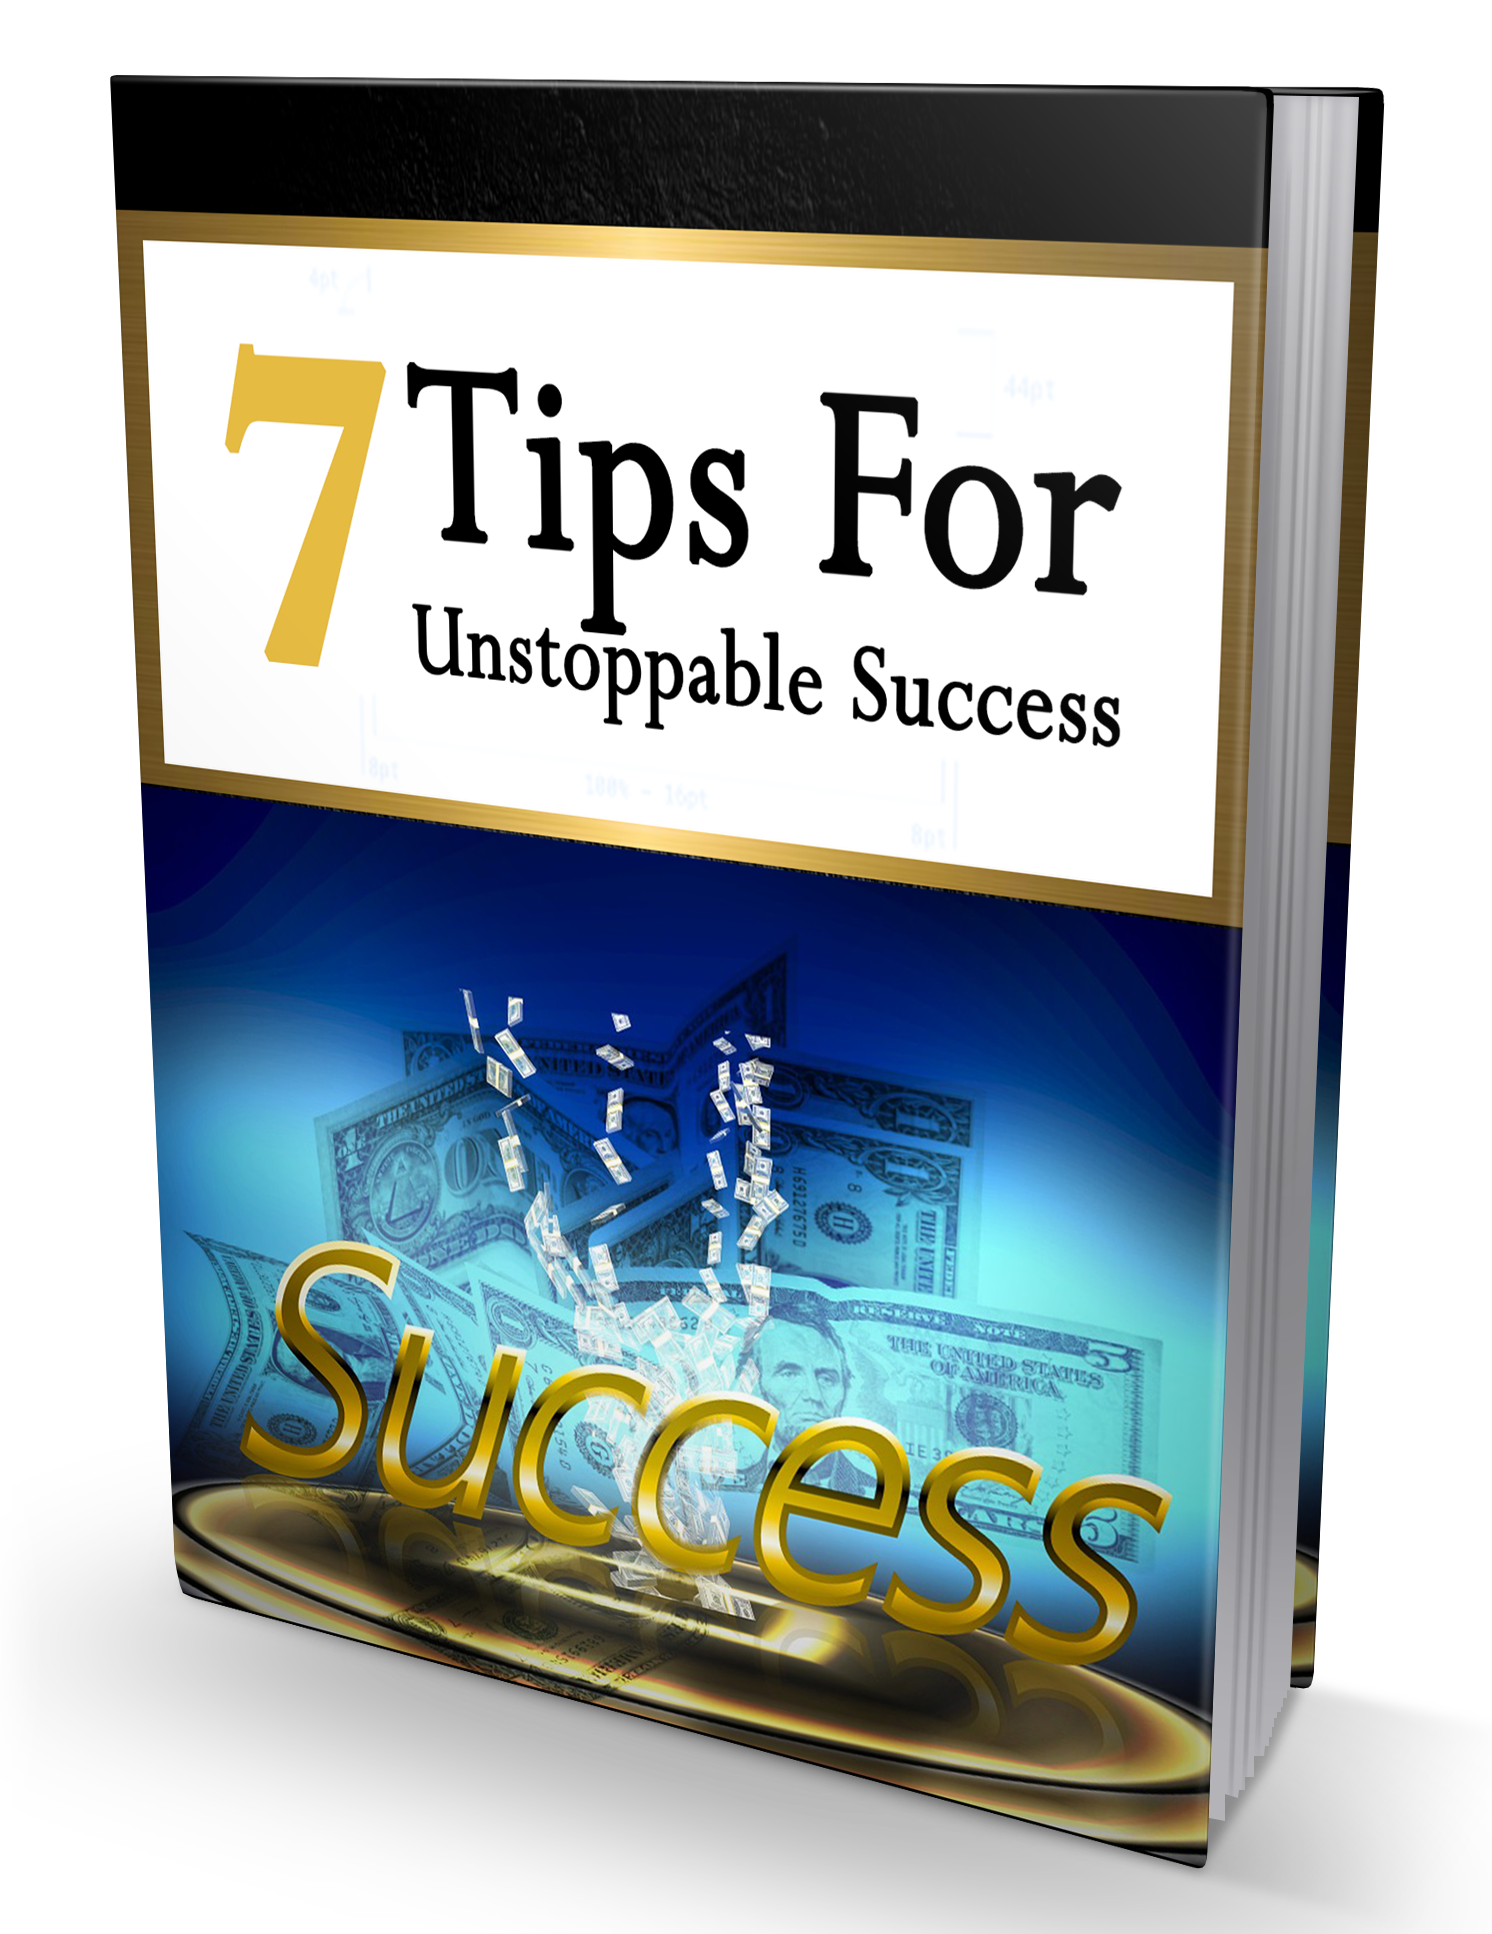 7 Tips For Unstoppable Success